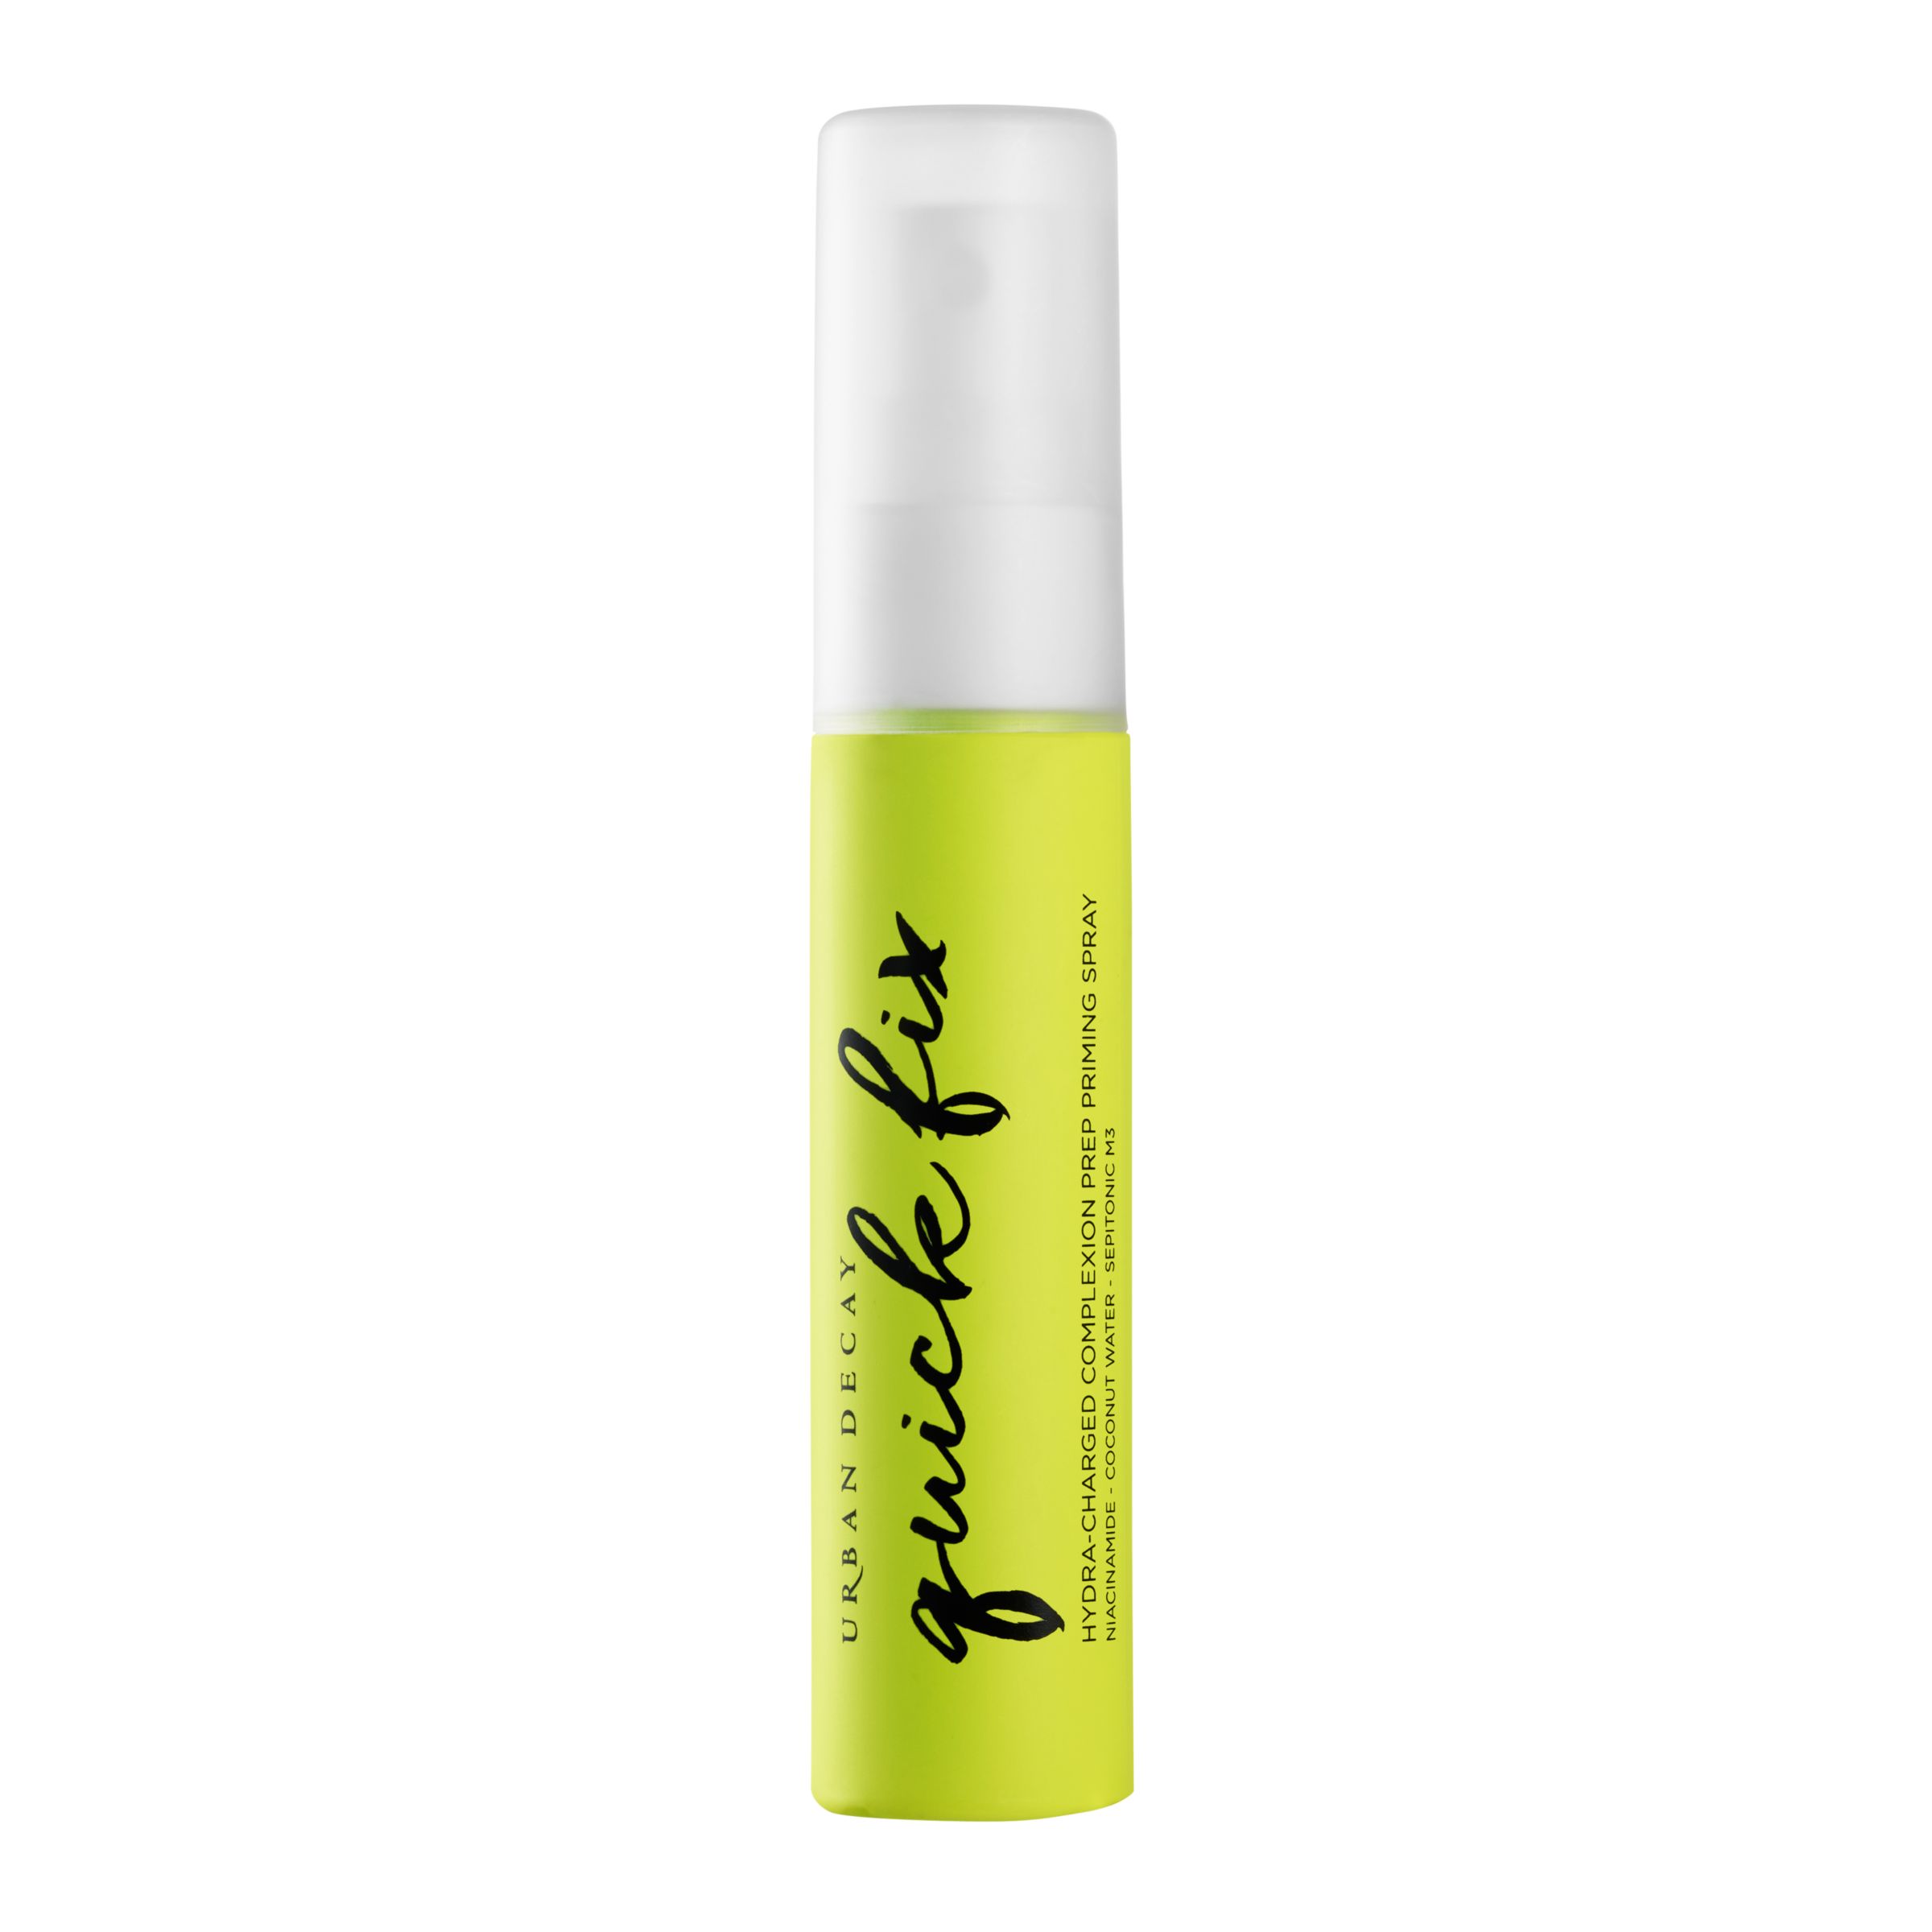 Urban Decay Quick Fix Hydra-Charged Complexion Prep Spray, Travel Size 1